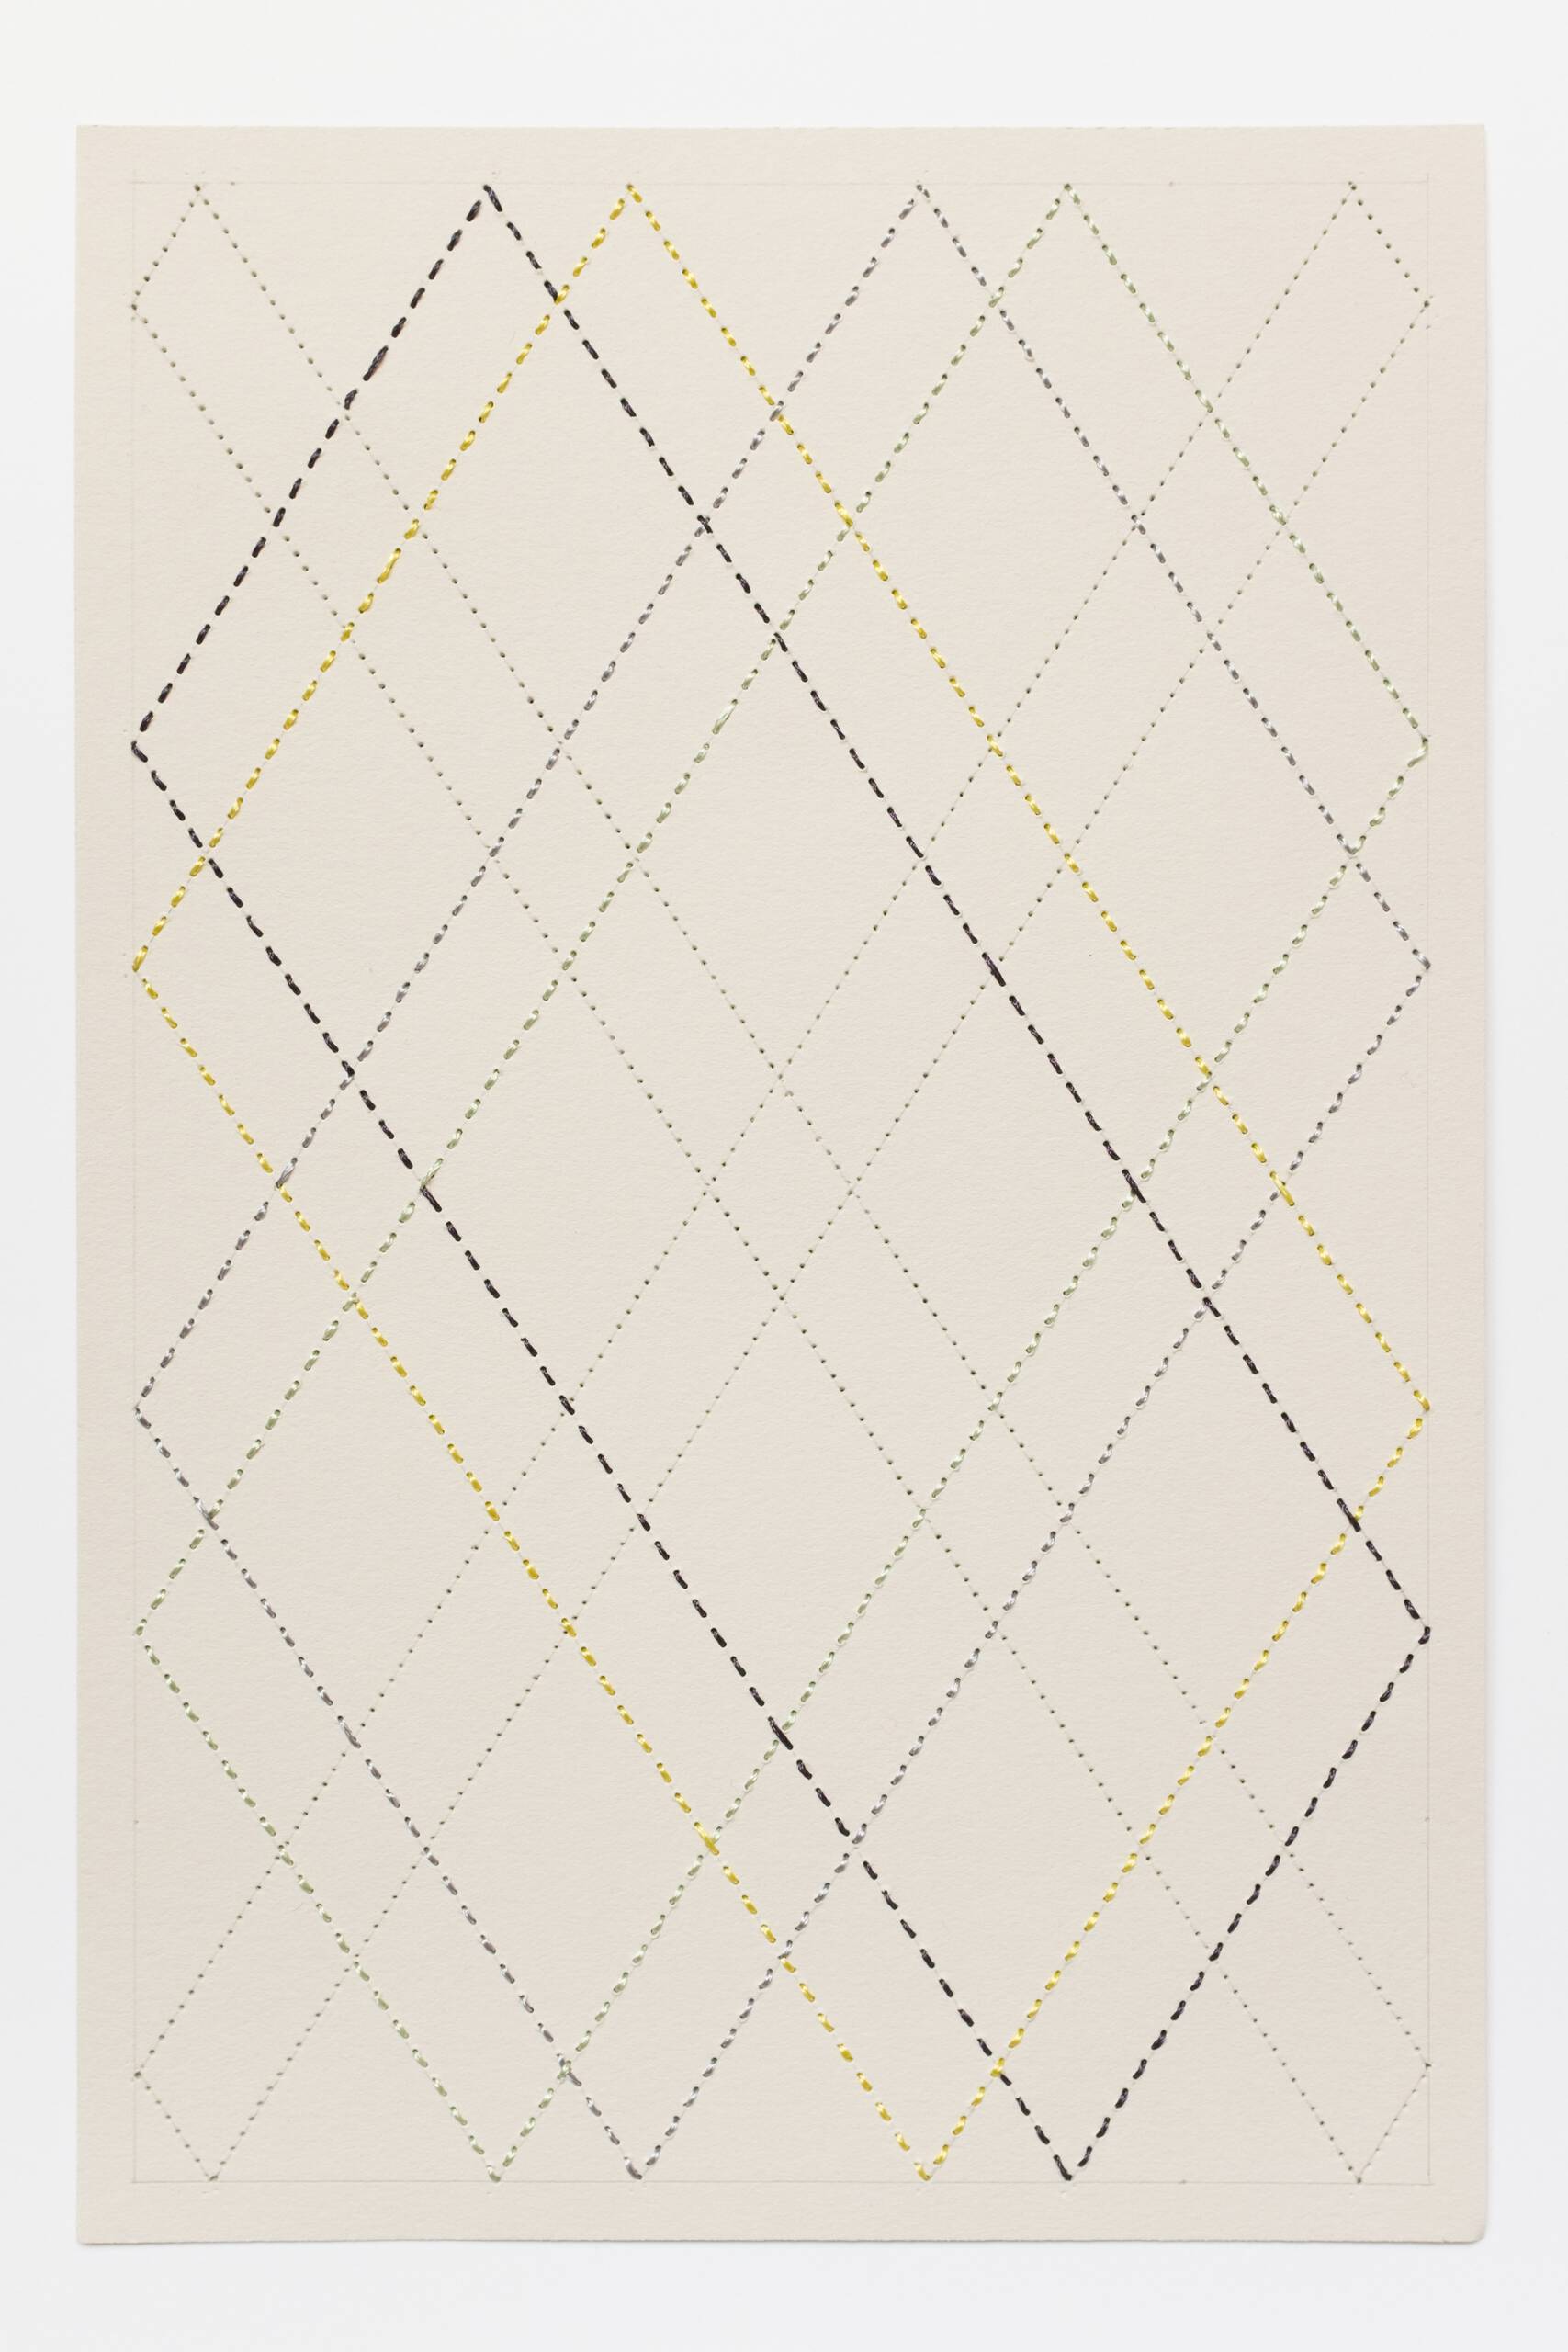 Quilted Composition [grey // diamonds], Hand-embroidered silk thread, pencil, and coloured pencil on paper, 2019